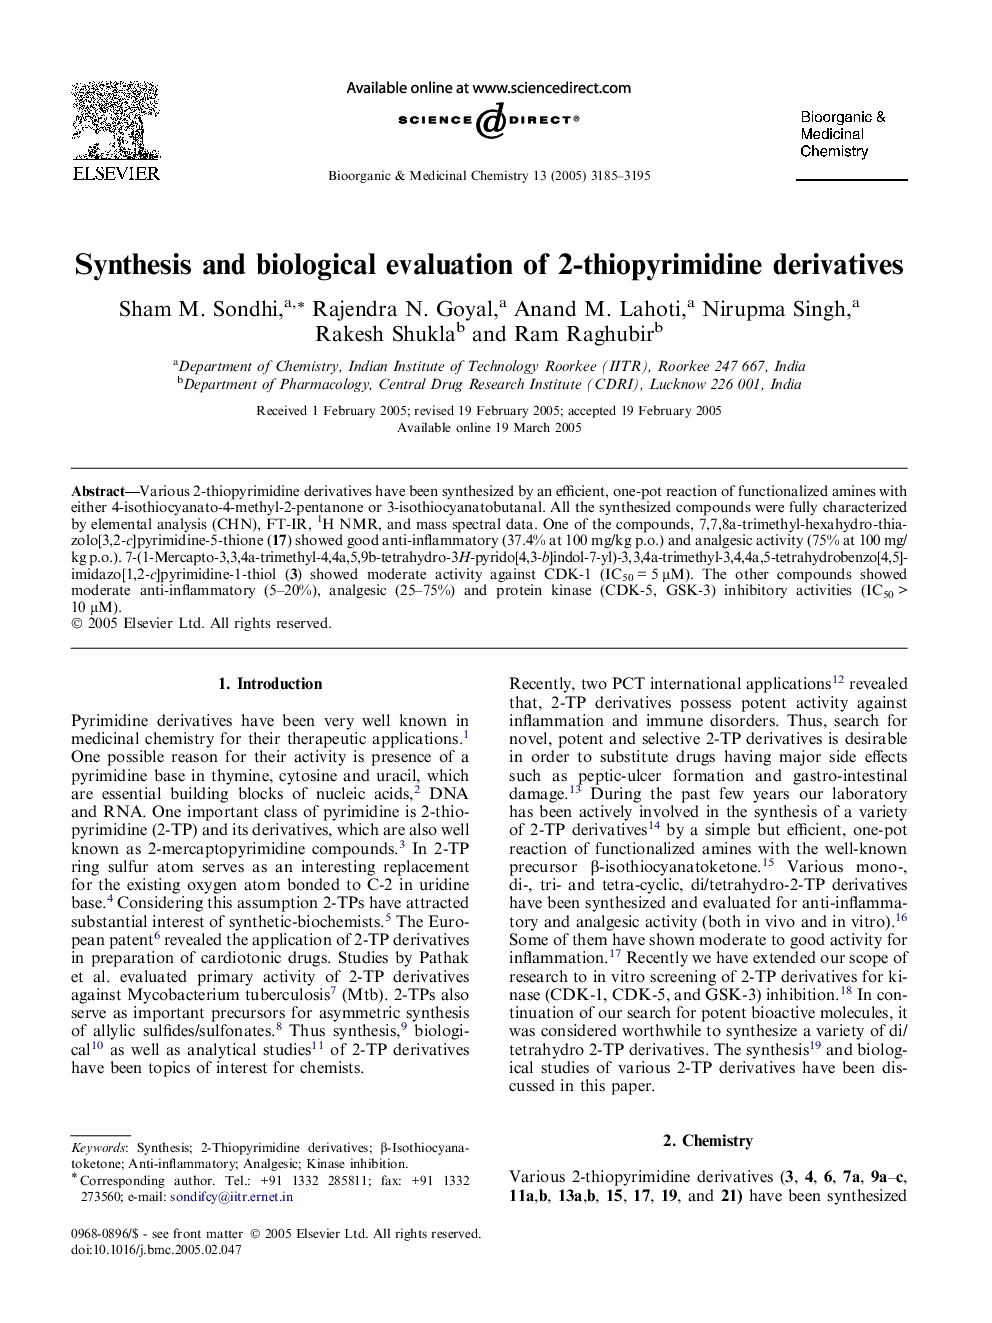 Synthesis and biological evaluation of 2-thiopyrimidine derivatives